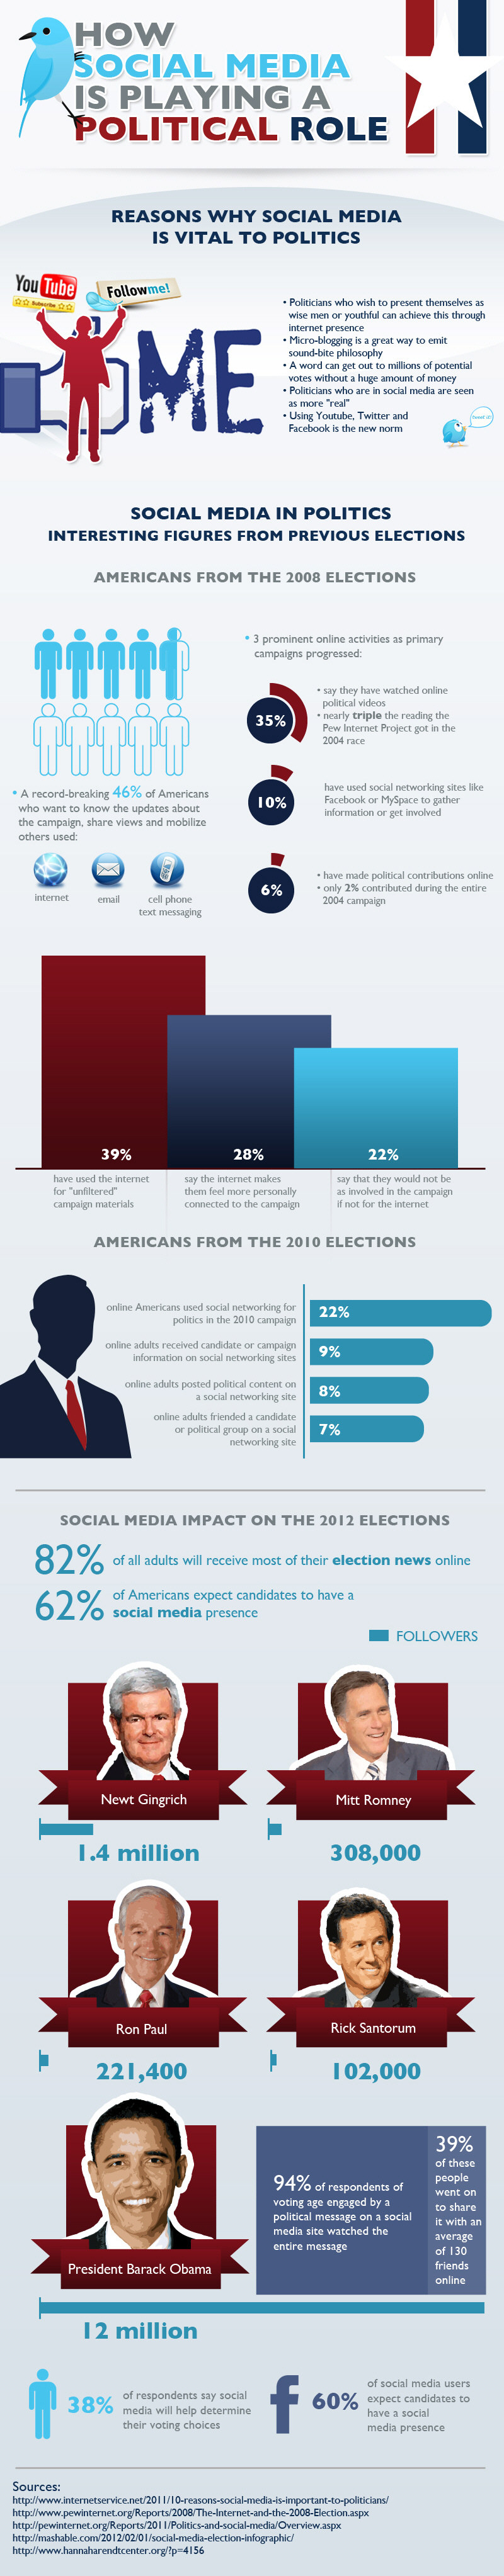 How Social Media is Playing a Political Role